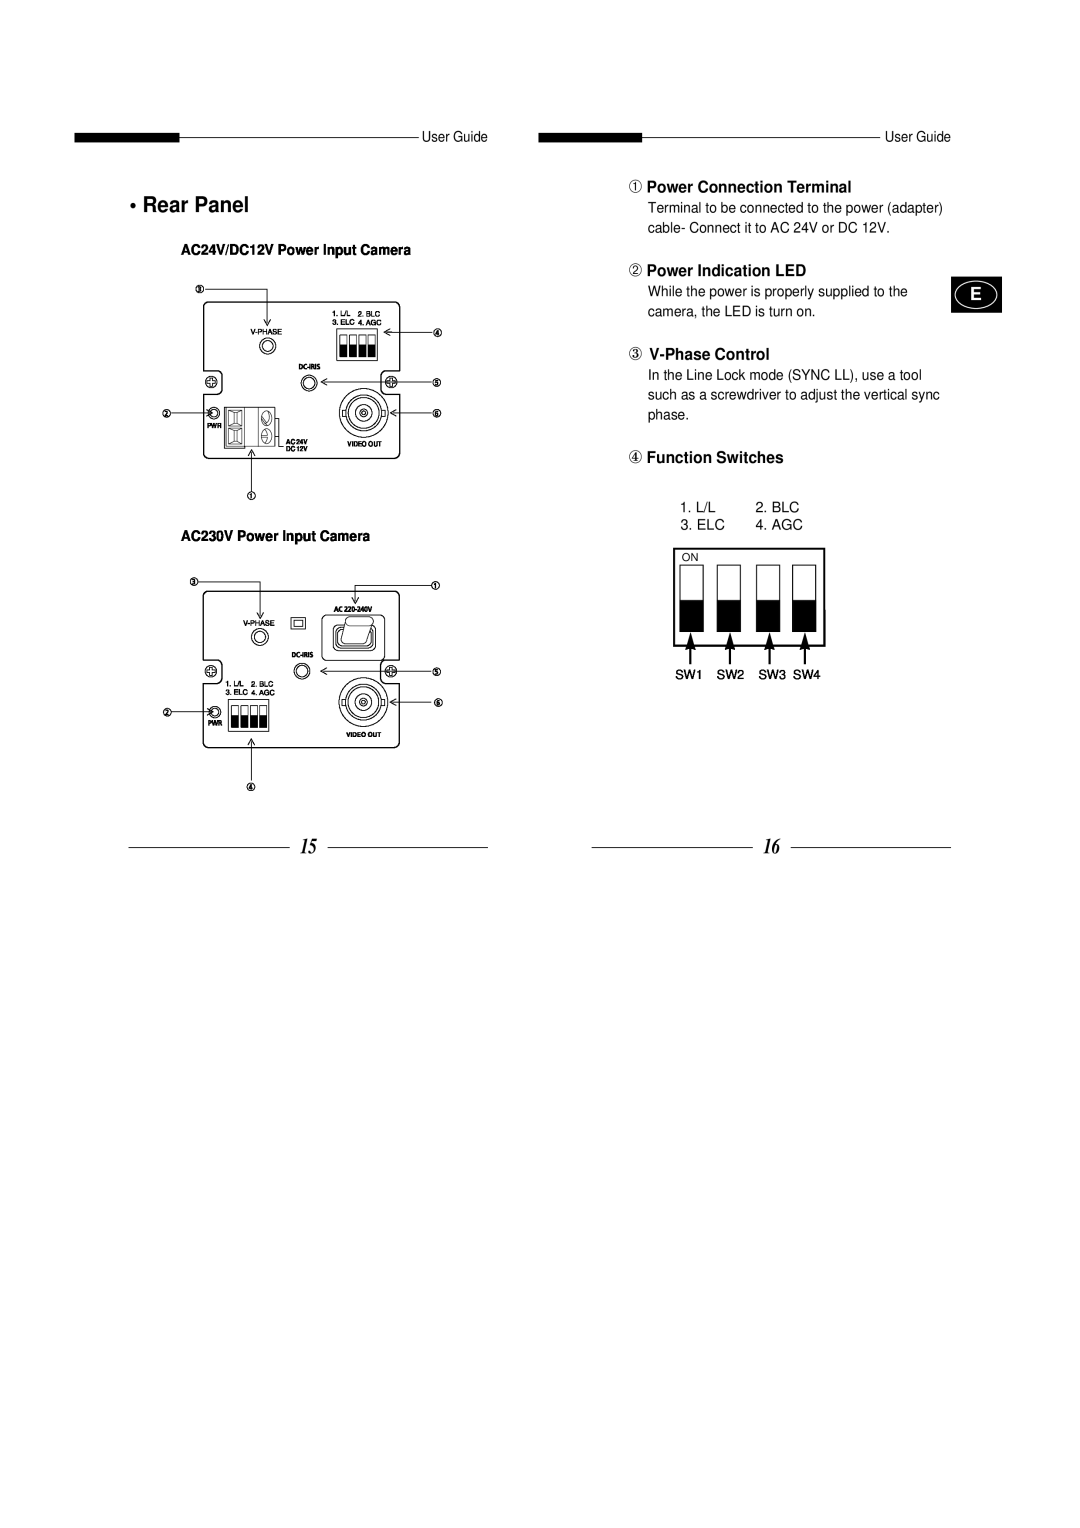 Samsung SBC-331AP/XEV manual Rear Panel, ➀ Power Connection Terminal, ➁ Power Indication LED, ③ V-Phase Control, Video Out 